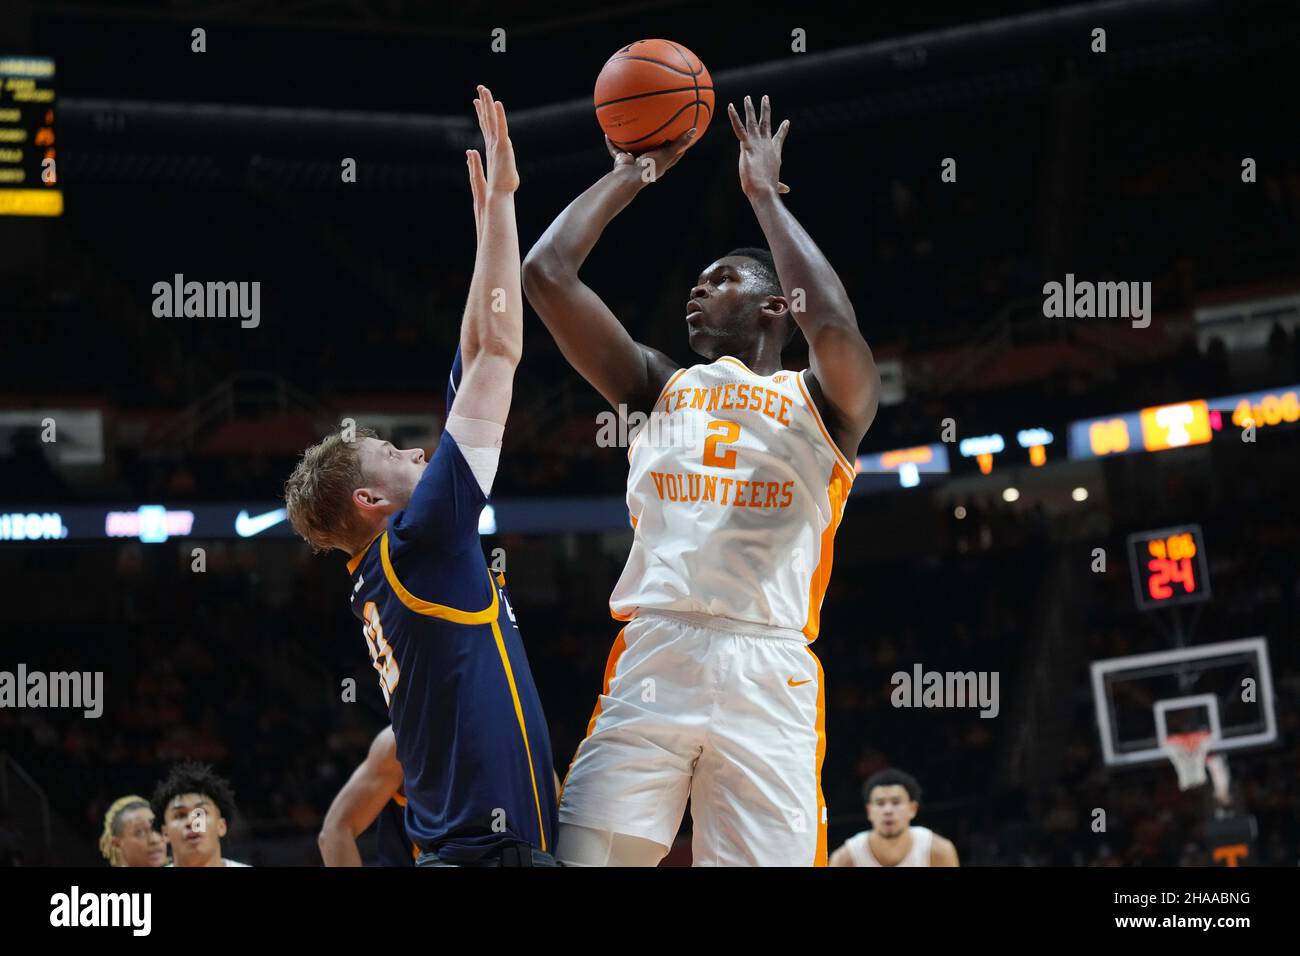 December 11, 2021: Brandon Huntley-Hatfield #2 of the Tennessee Volunteers shoots the ball over Bas Leyte #33 of the UNC-Greensboro Spartans during the NCAA basketball game between the University of Tennessee Volunteers and the University of North Carolina at Greensboro Spartans at Thompson-Boling Arena in Knoxville TN Tim Gangloff/CSM Stock Photo